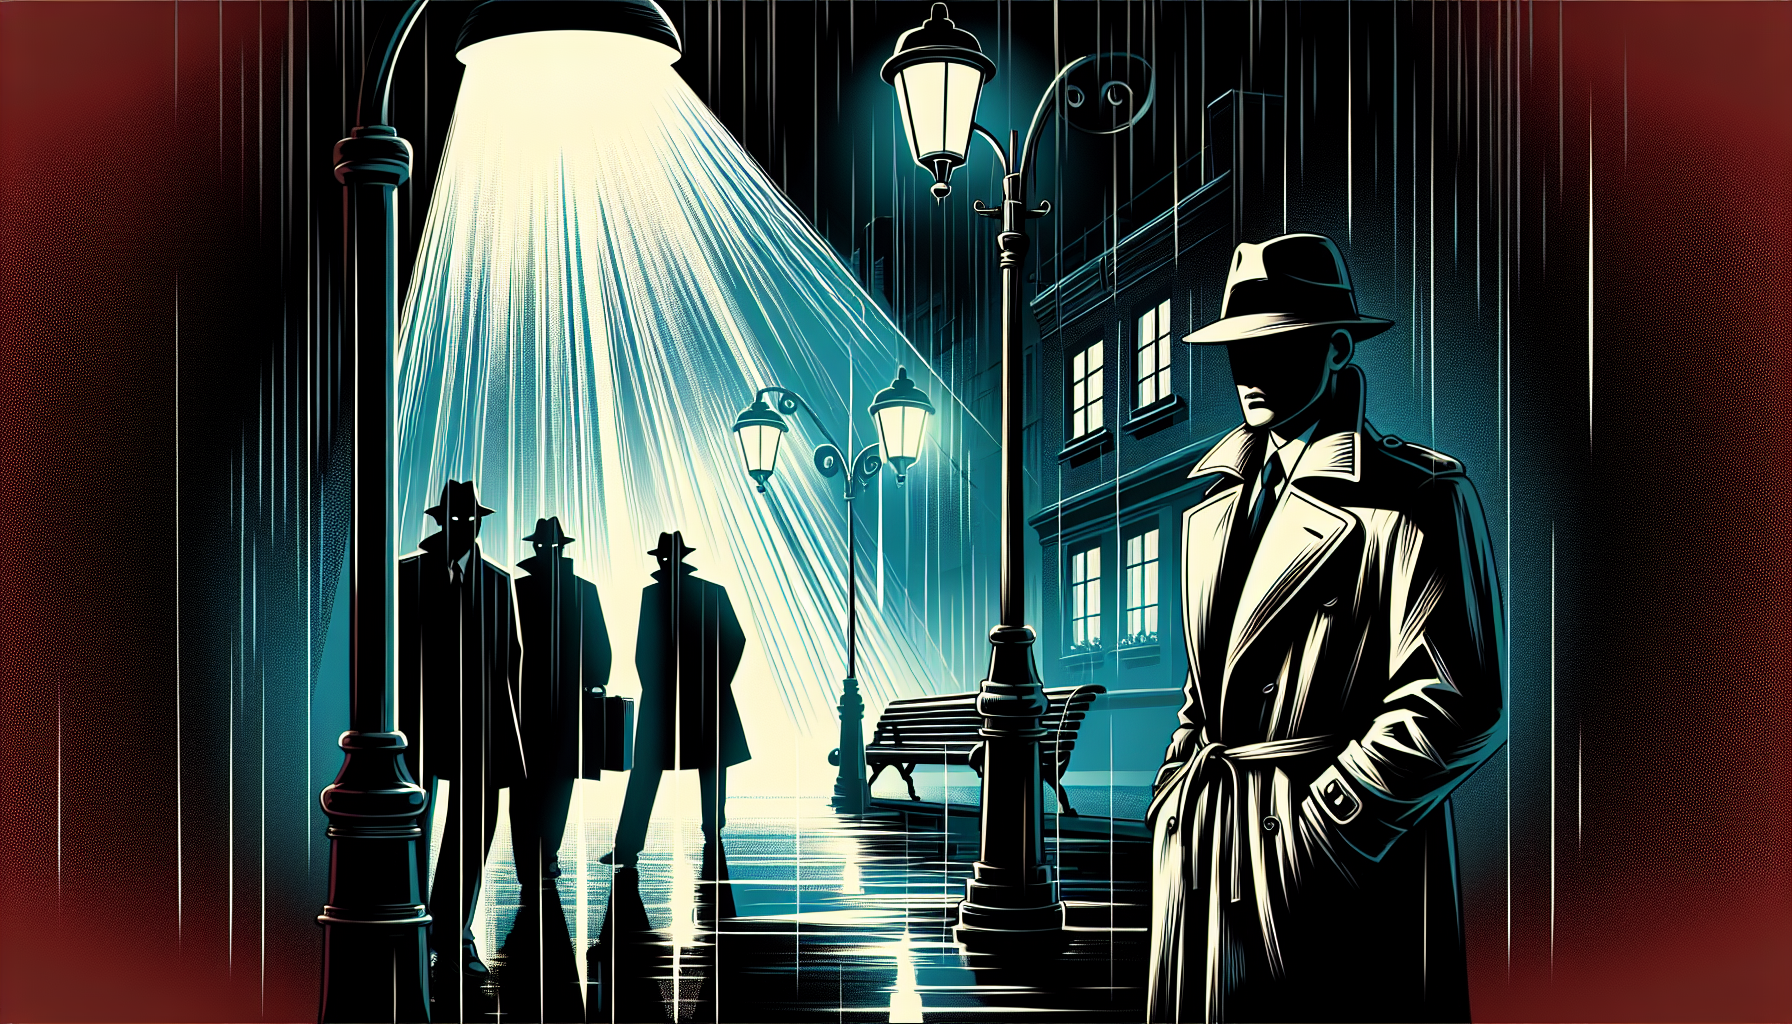 A moody, atmospheric illustration of a classic 1940s film noir scene, featuring a dimly lit, rain-slicked street, a trench-coated detective under a street lamp, and shadowy figures in the background,